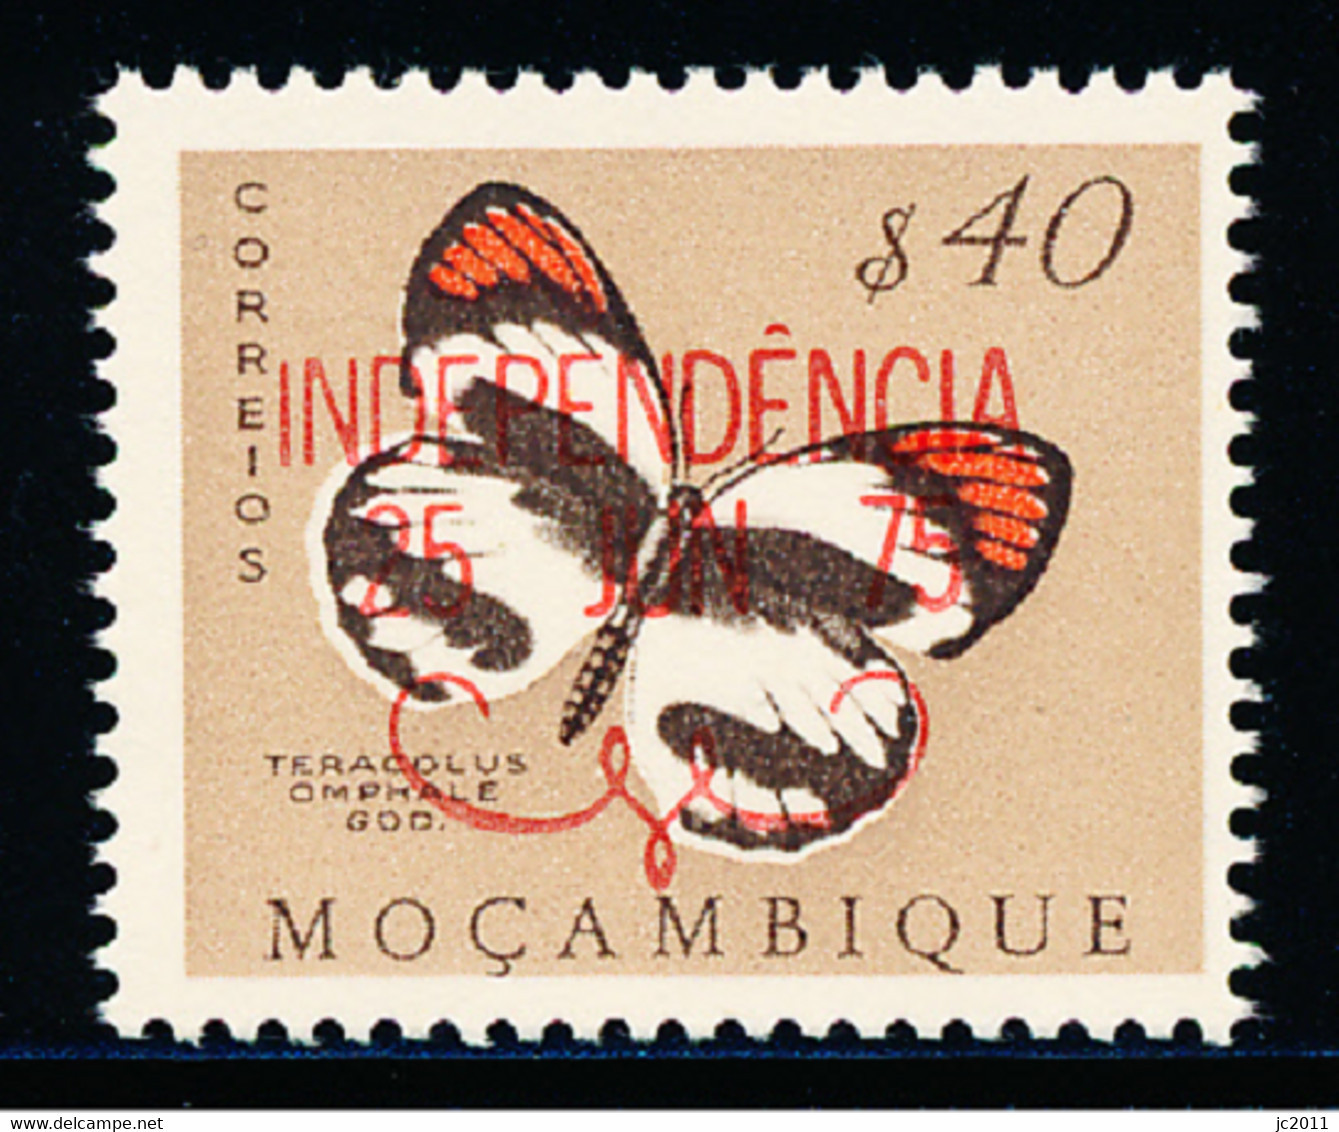 Mozambique - 1975 - Independence / Butterfly - 1953 / Type- MNH - Mozambique